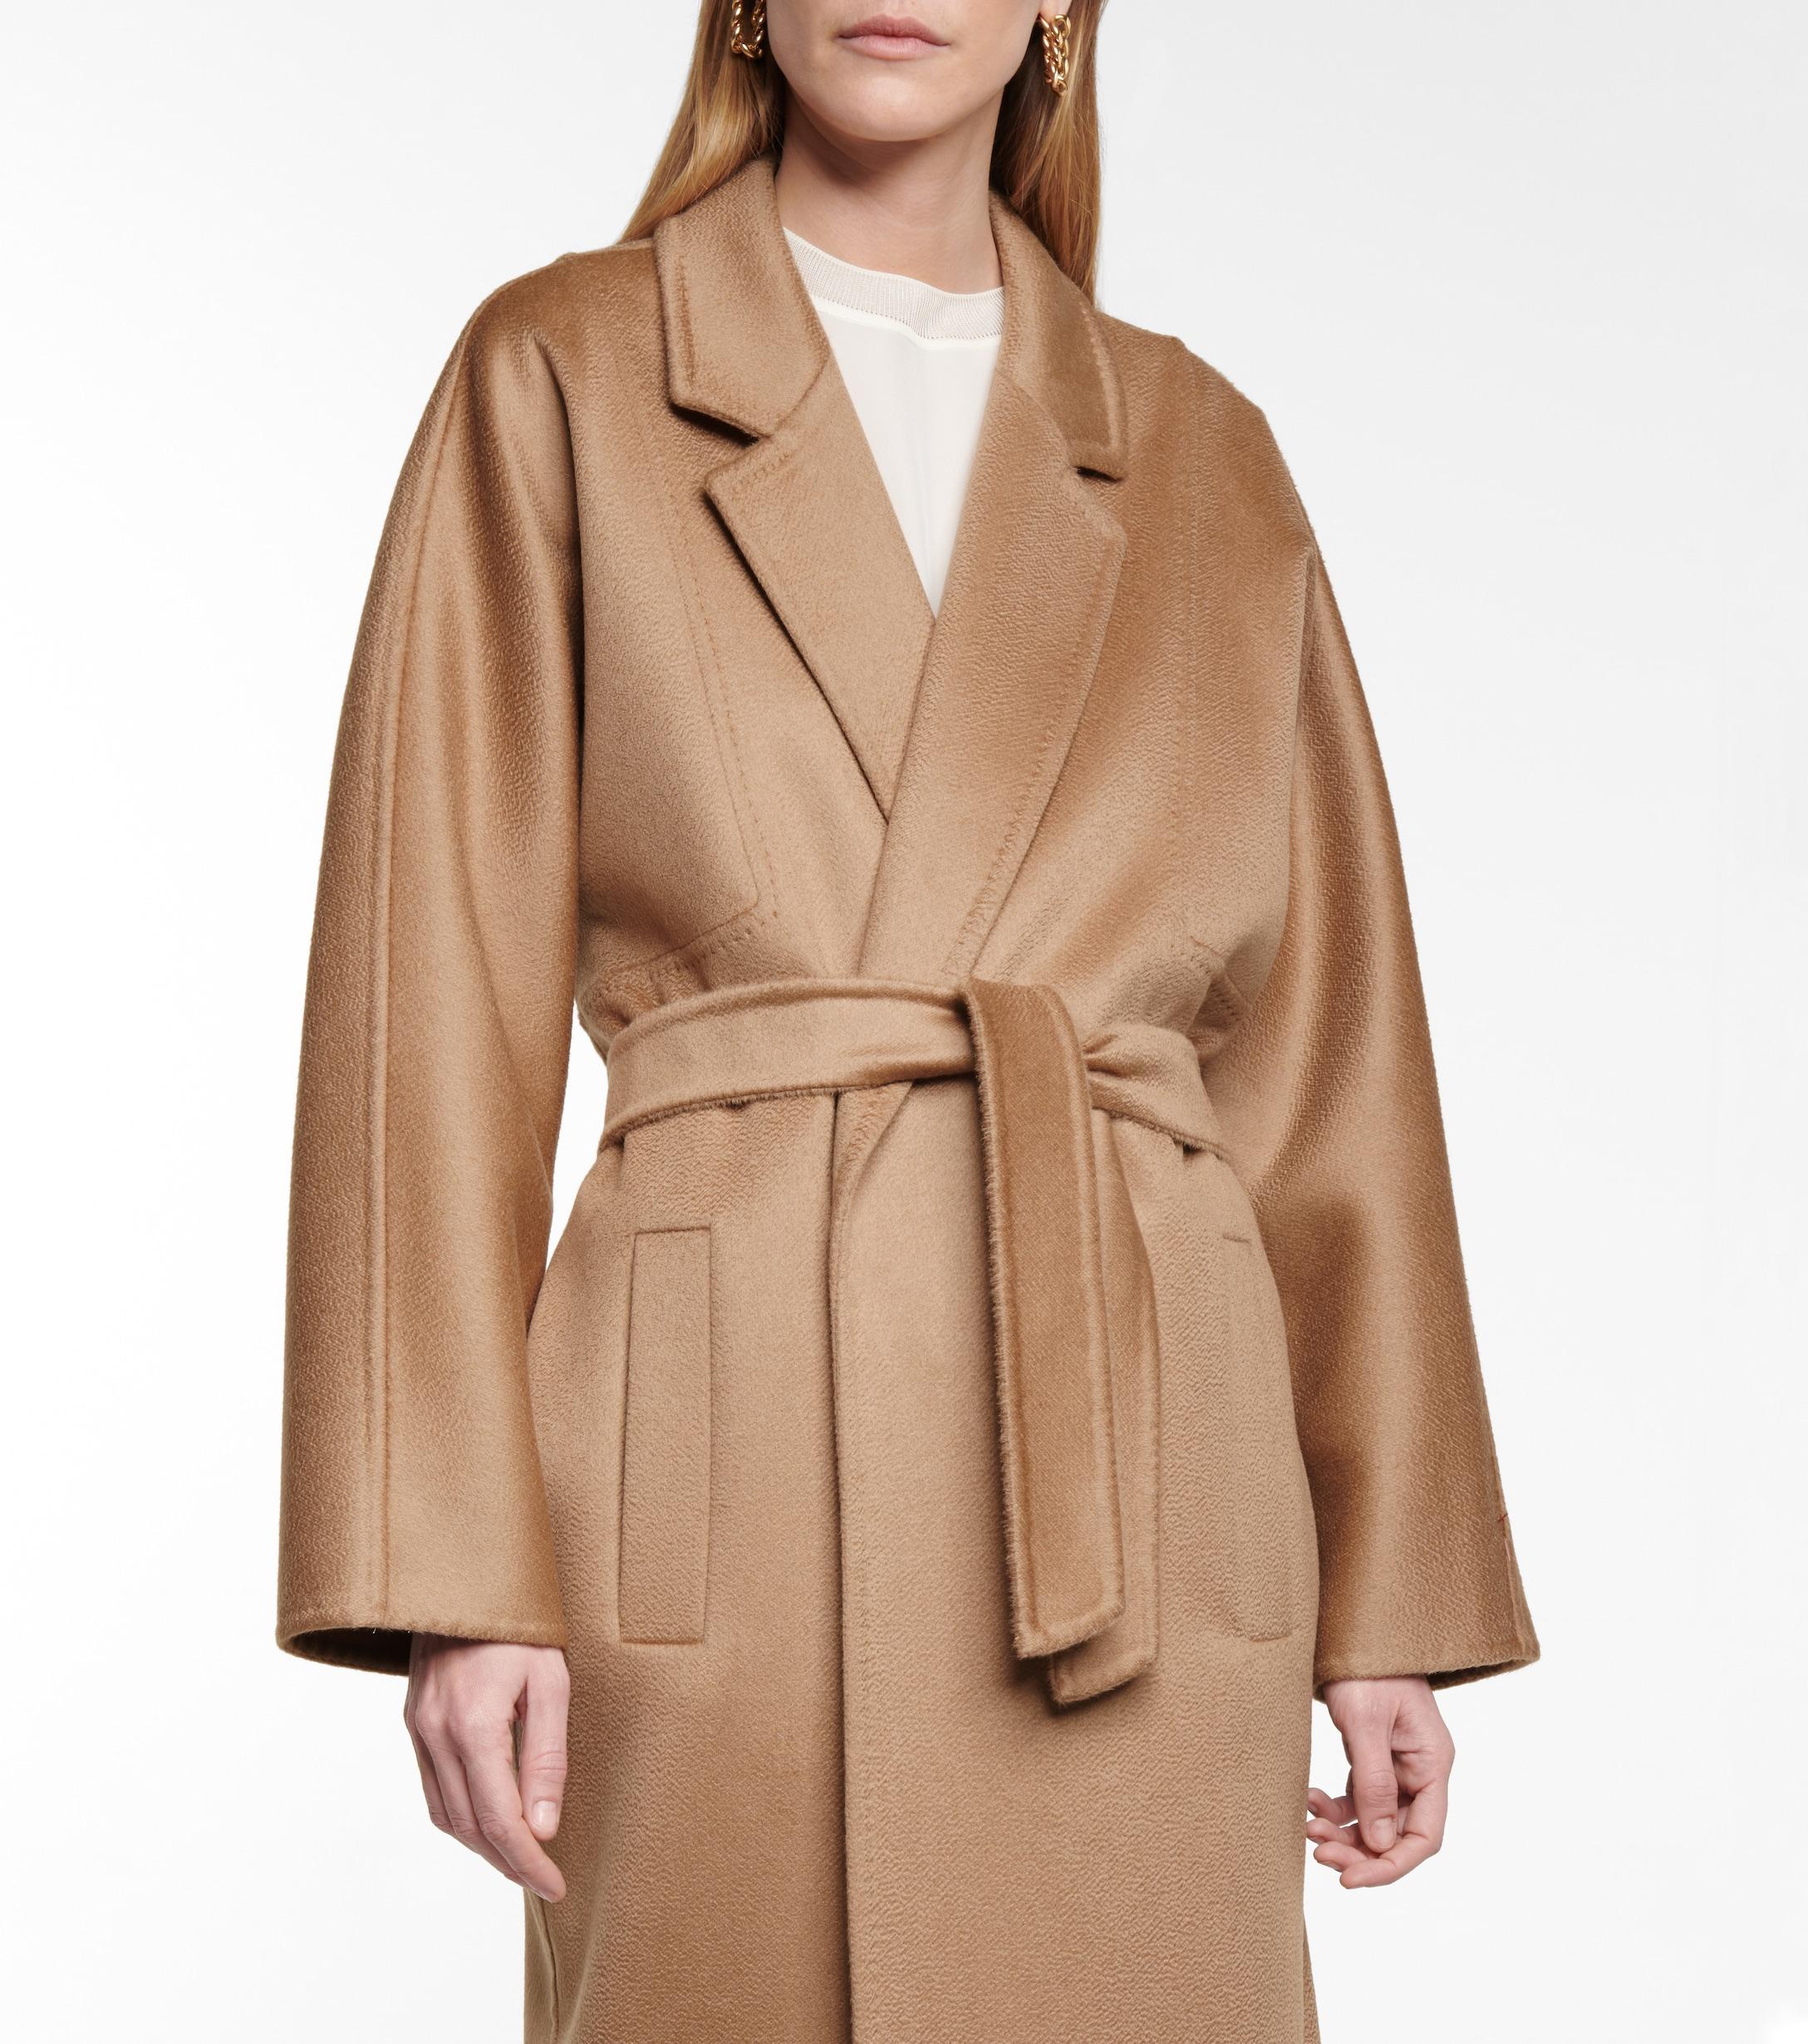 Max Mara Andorra Double-faced Cashmere Coat in Brown - Lyst